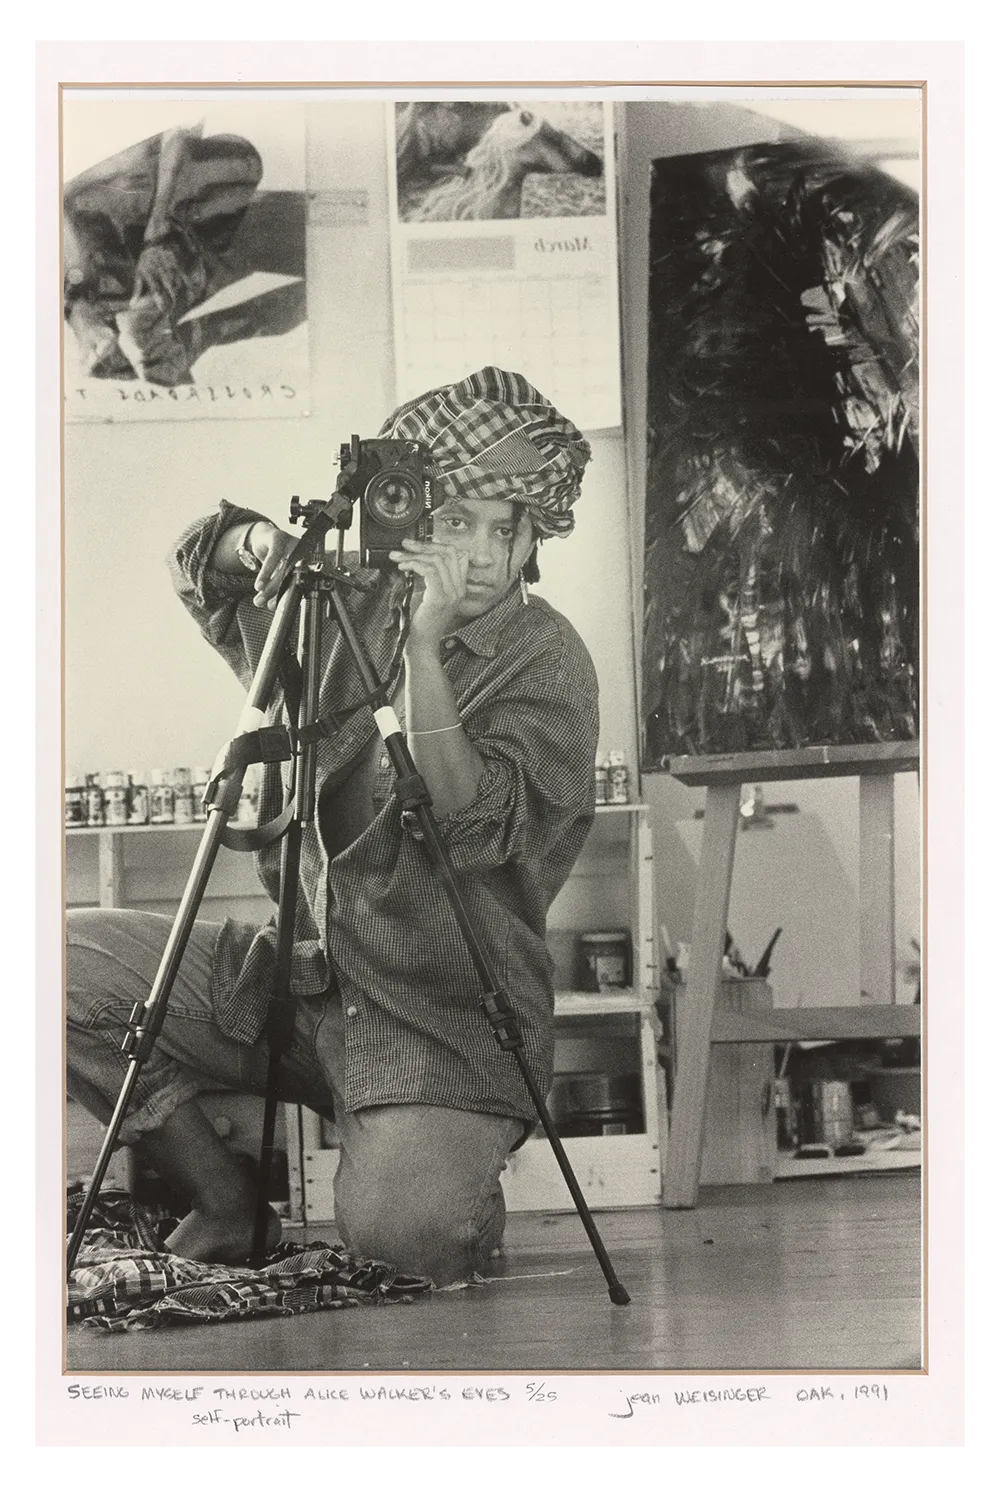 A black-and-white photograph of Alice Walker kneeling behind a camera and looking straight ahead.